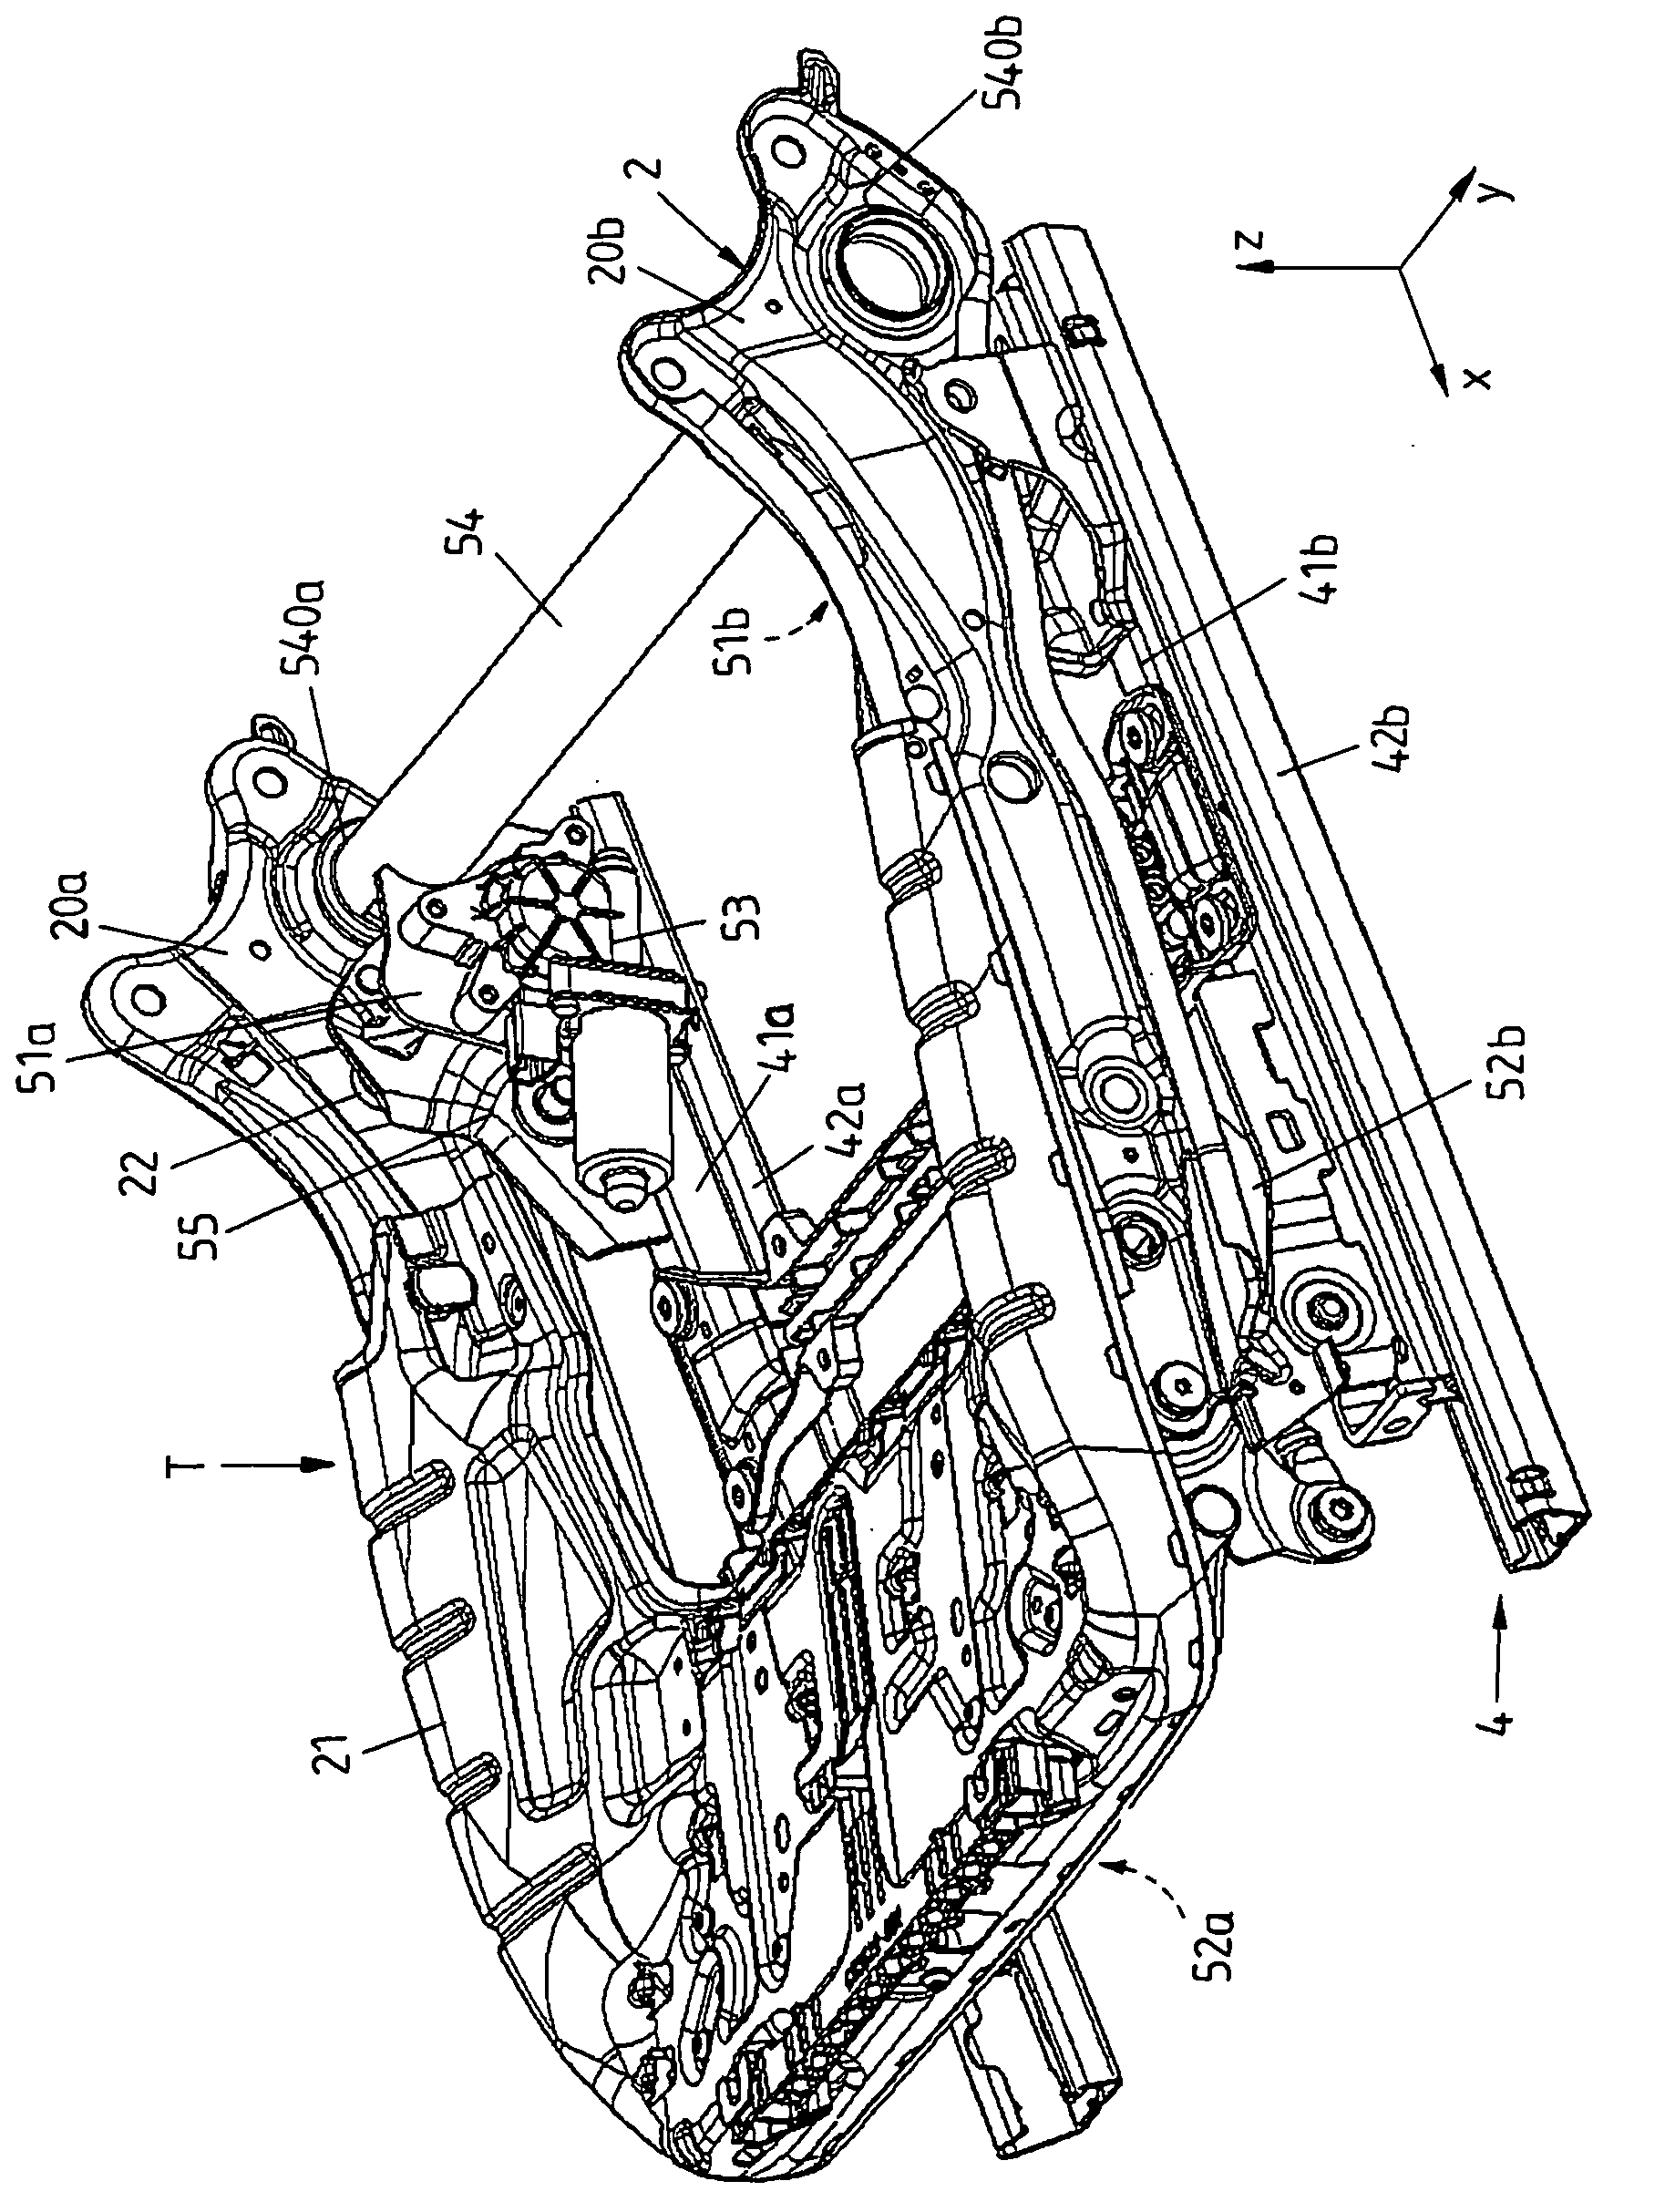 Vehicle seat having a height adjustment device